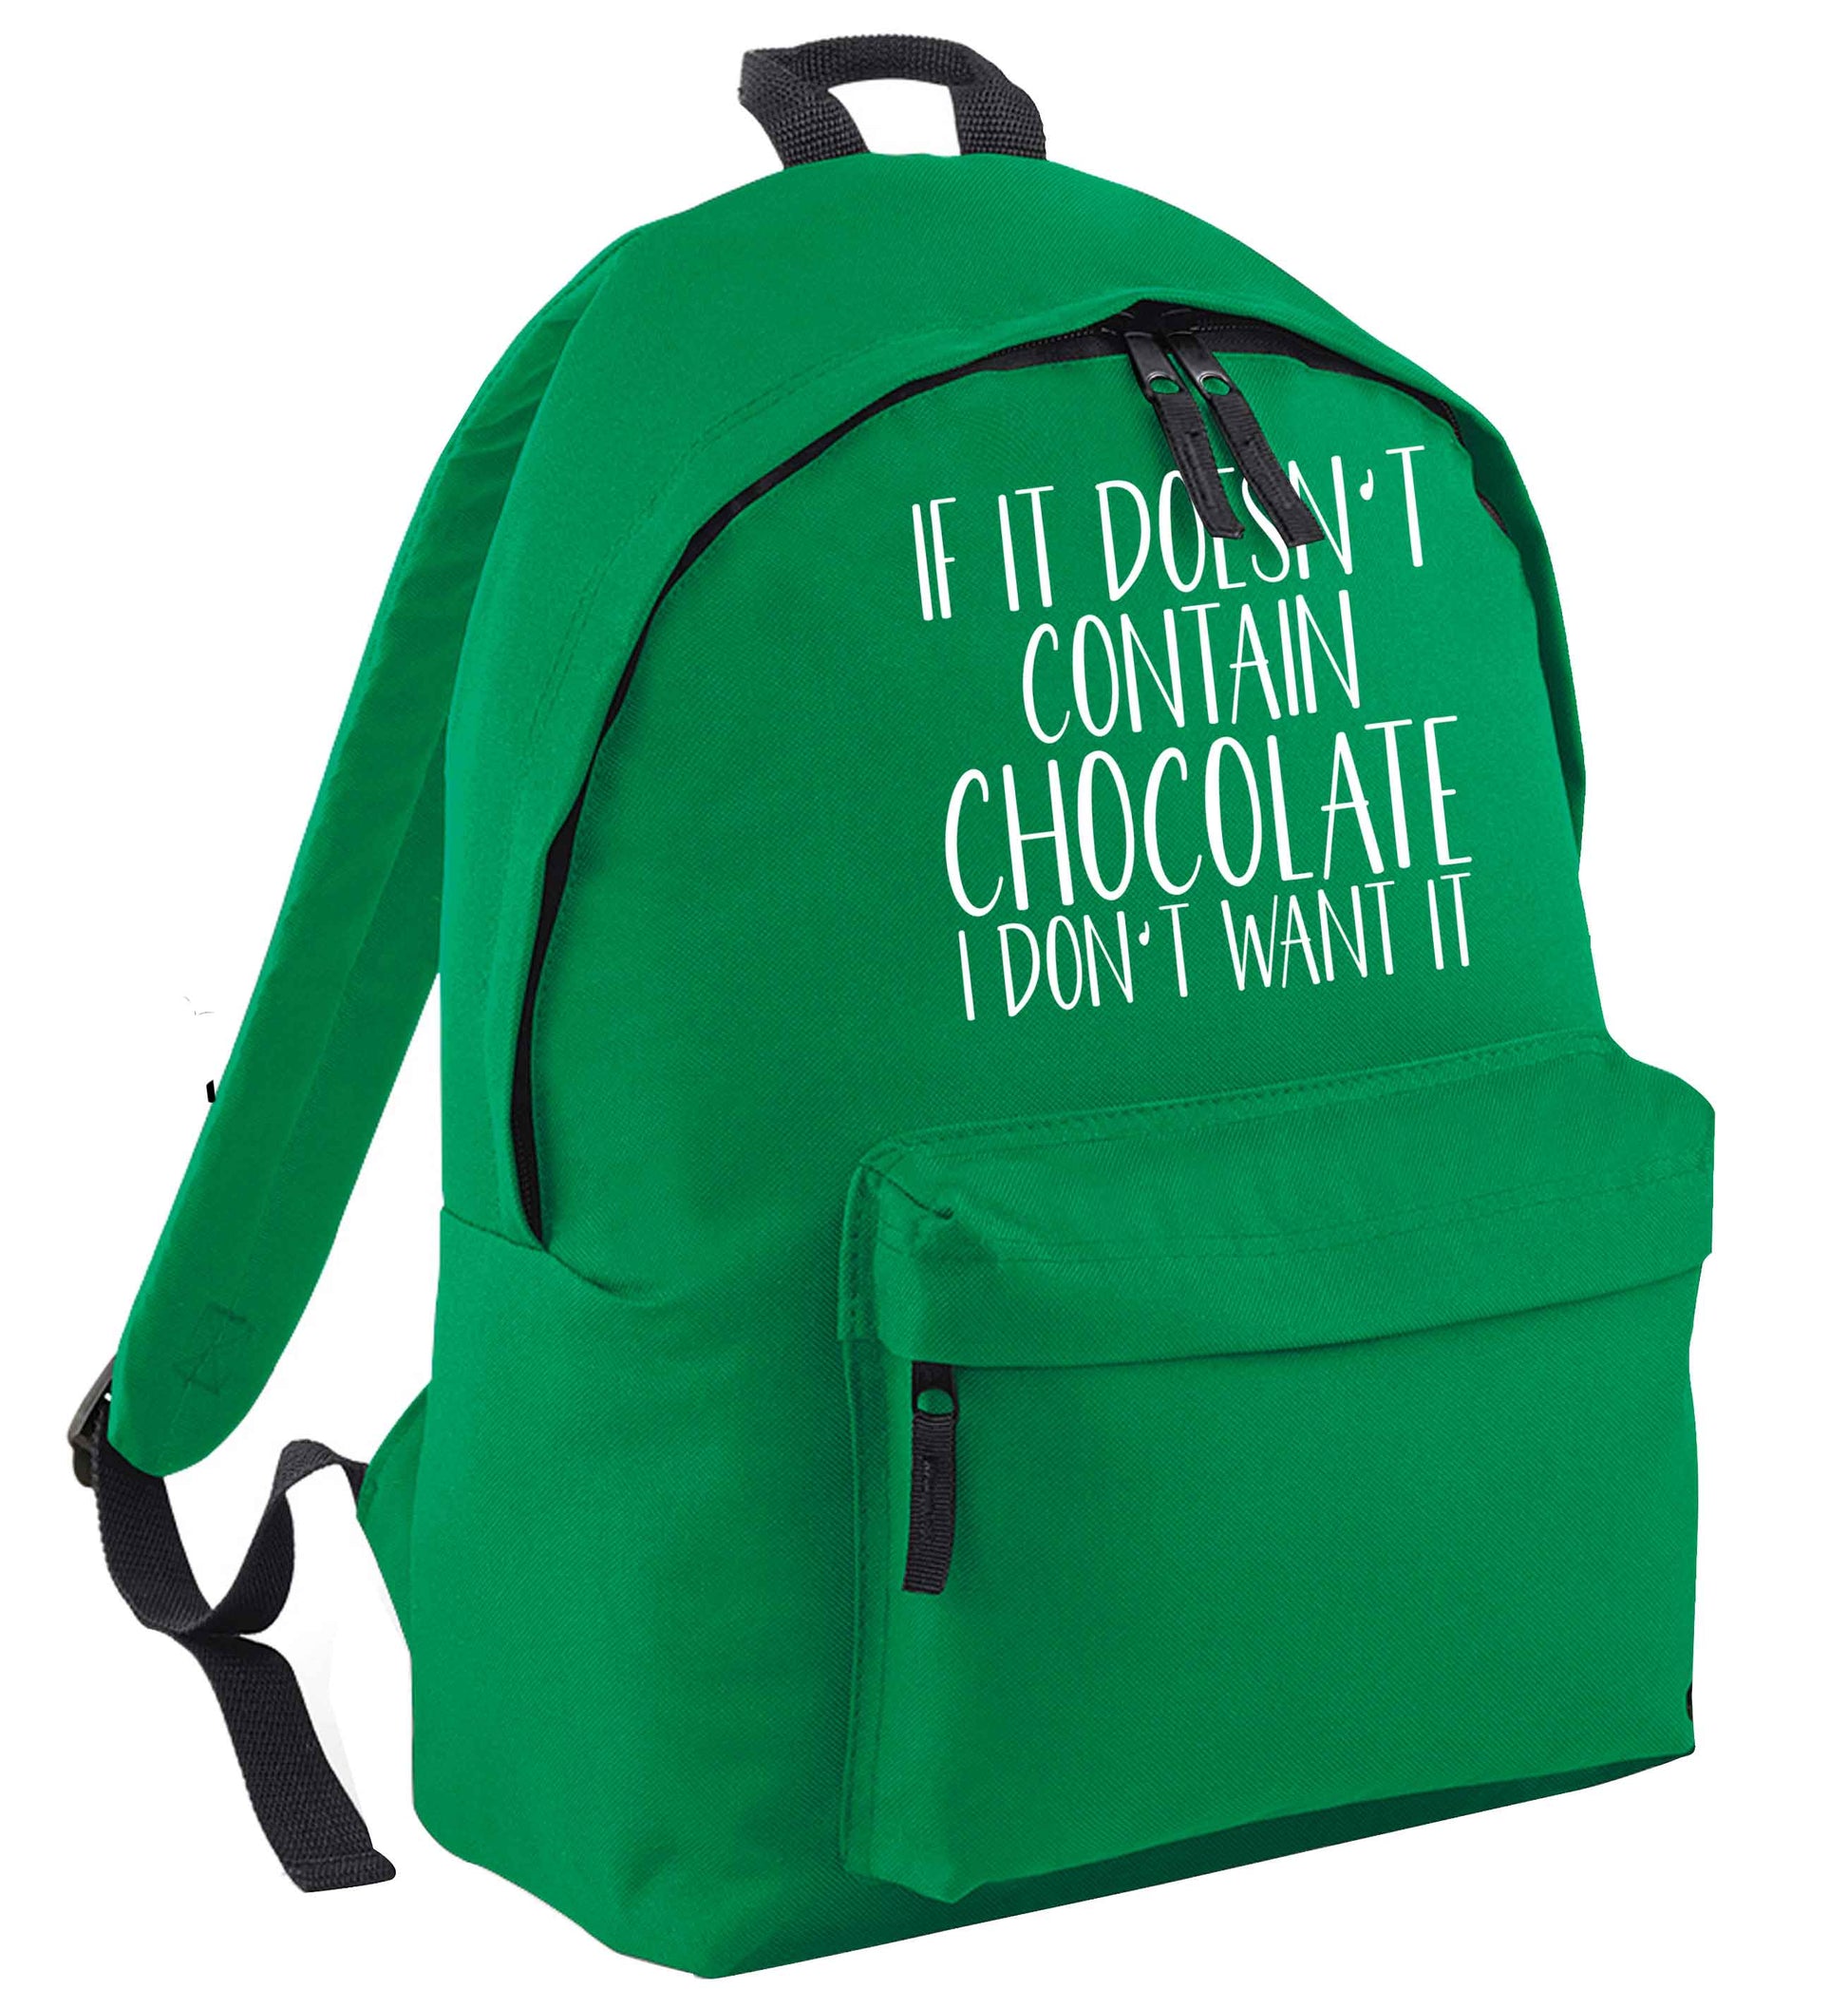 If it doesn't contain chocolate I don't want it green adults backpack